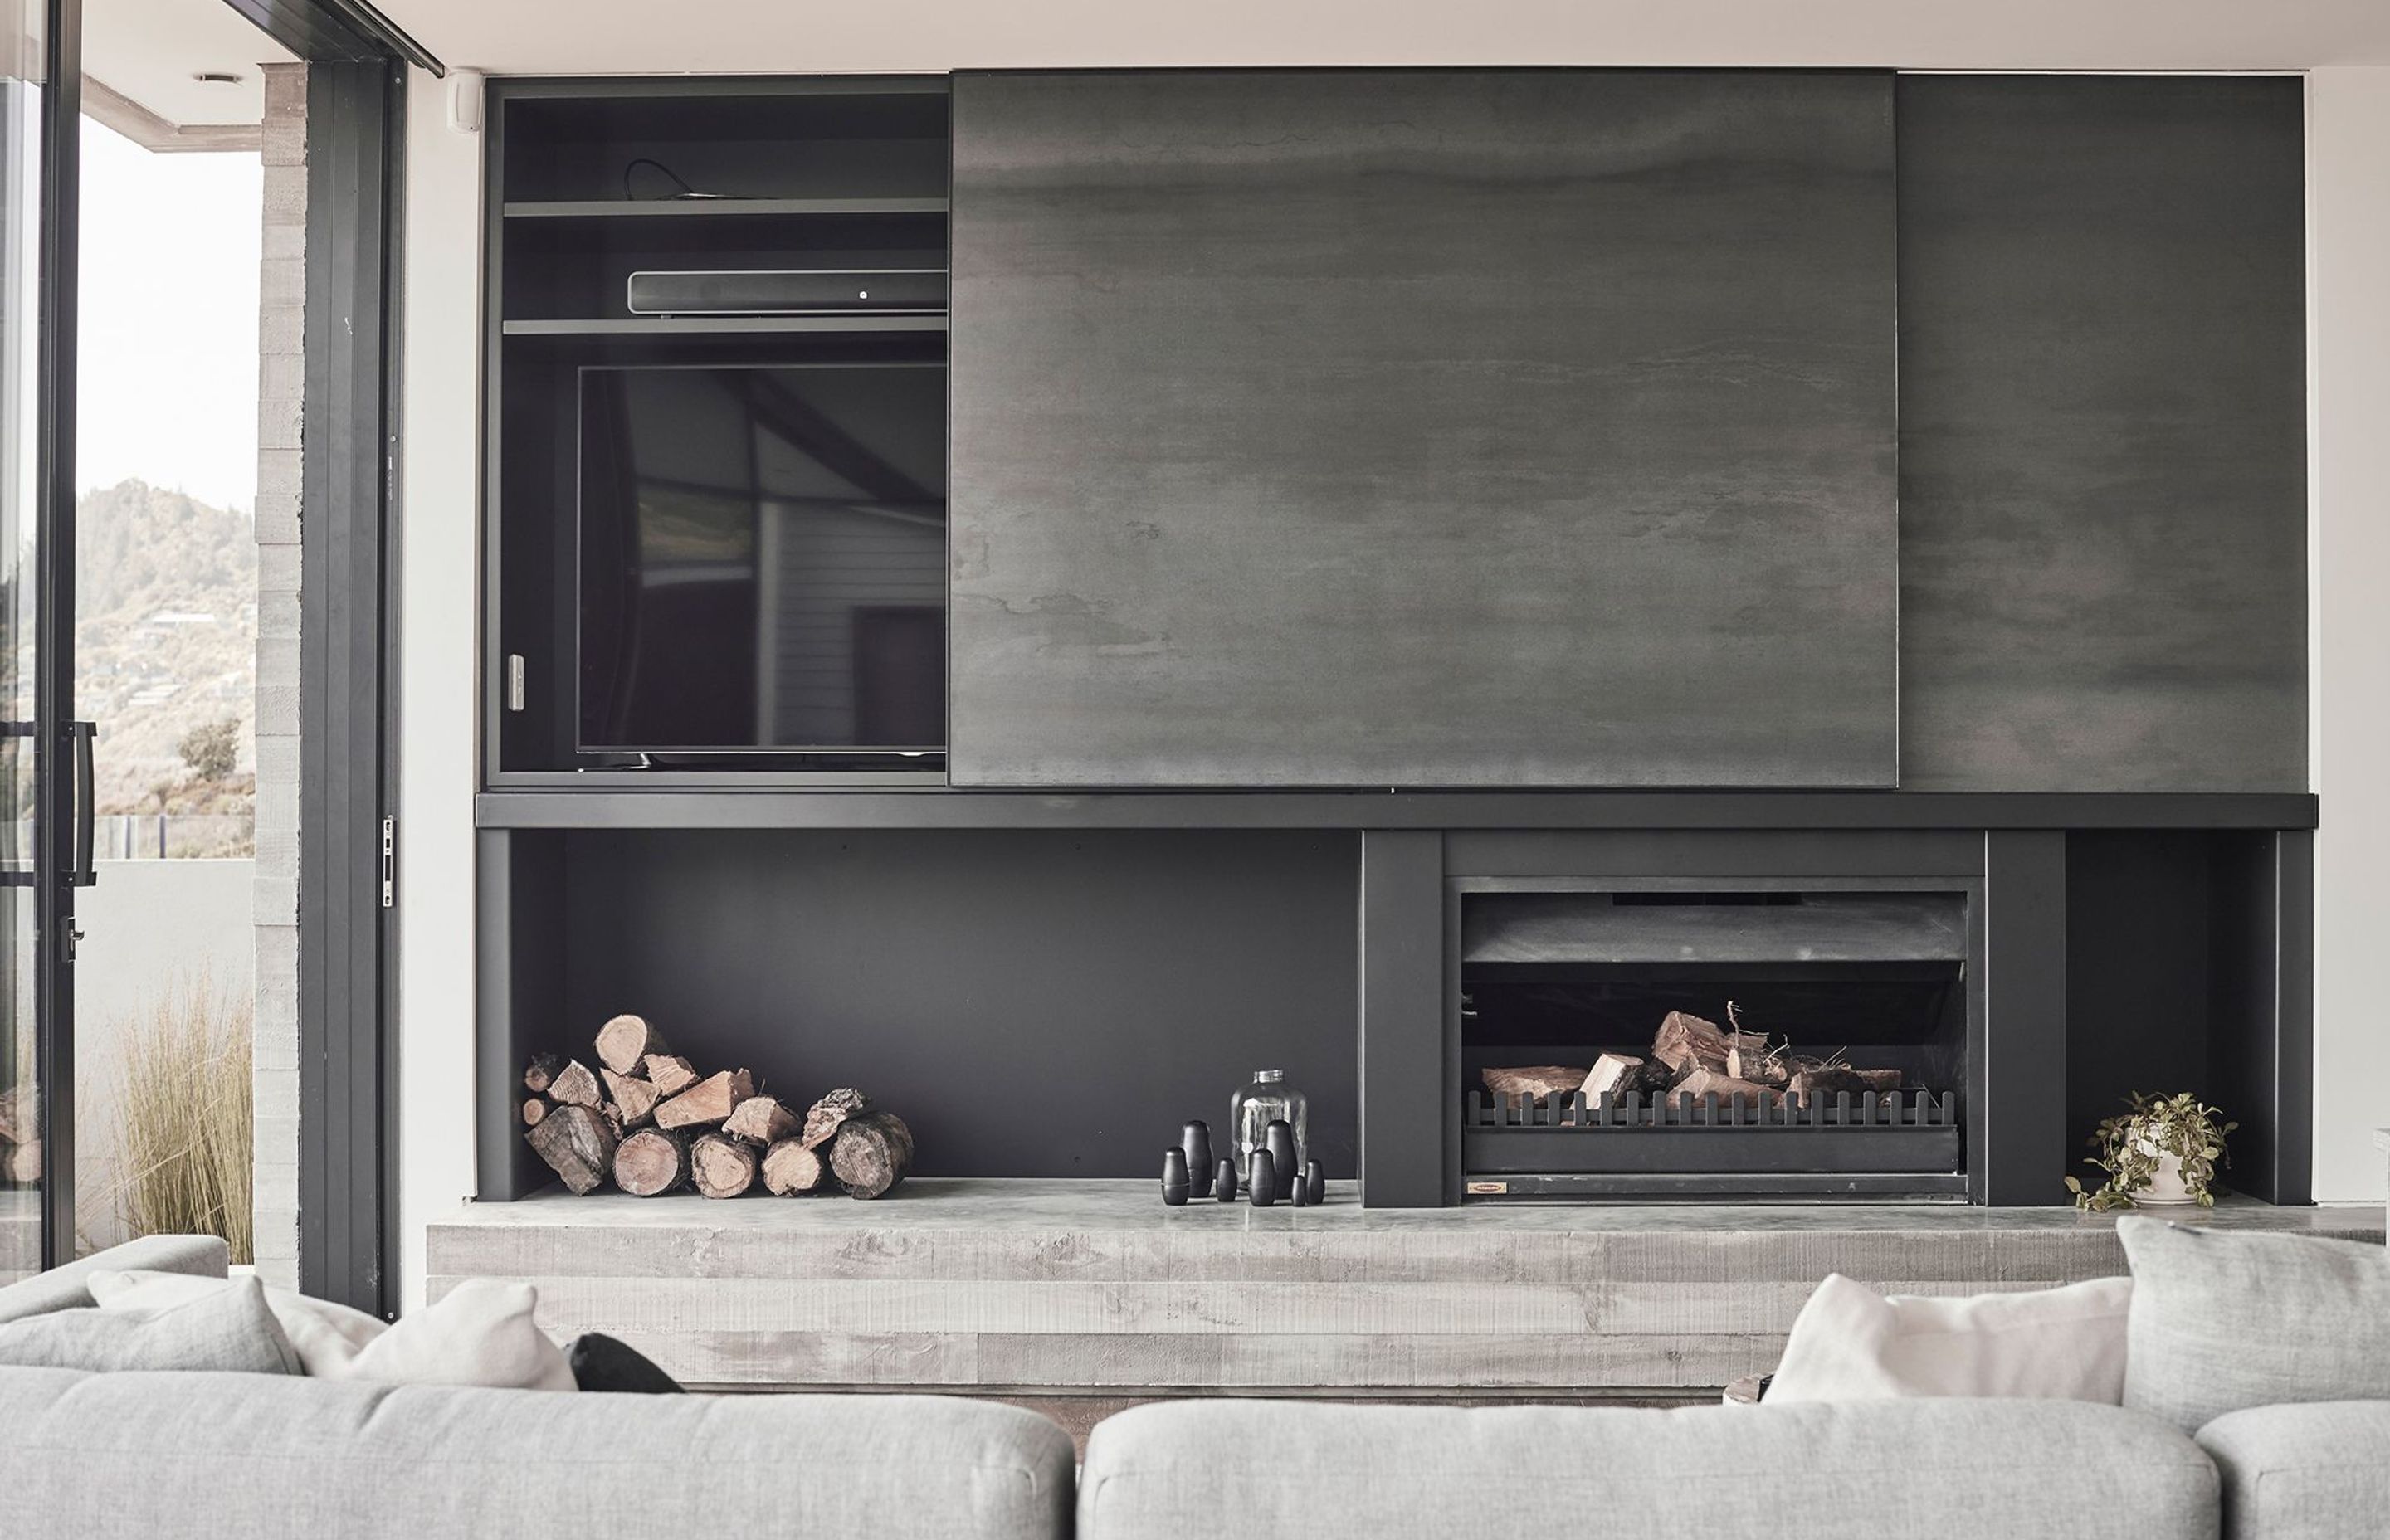 A woodburner atop an in situ concrete plinth provides warmth, surrounded by dark porcelain panels that create a depth and contrast to the stark whites of the kitchen.